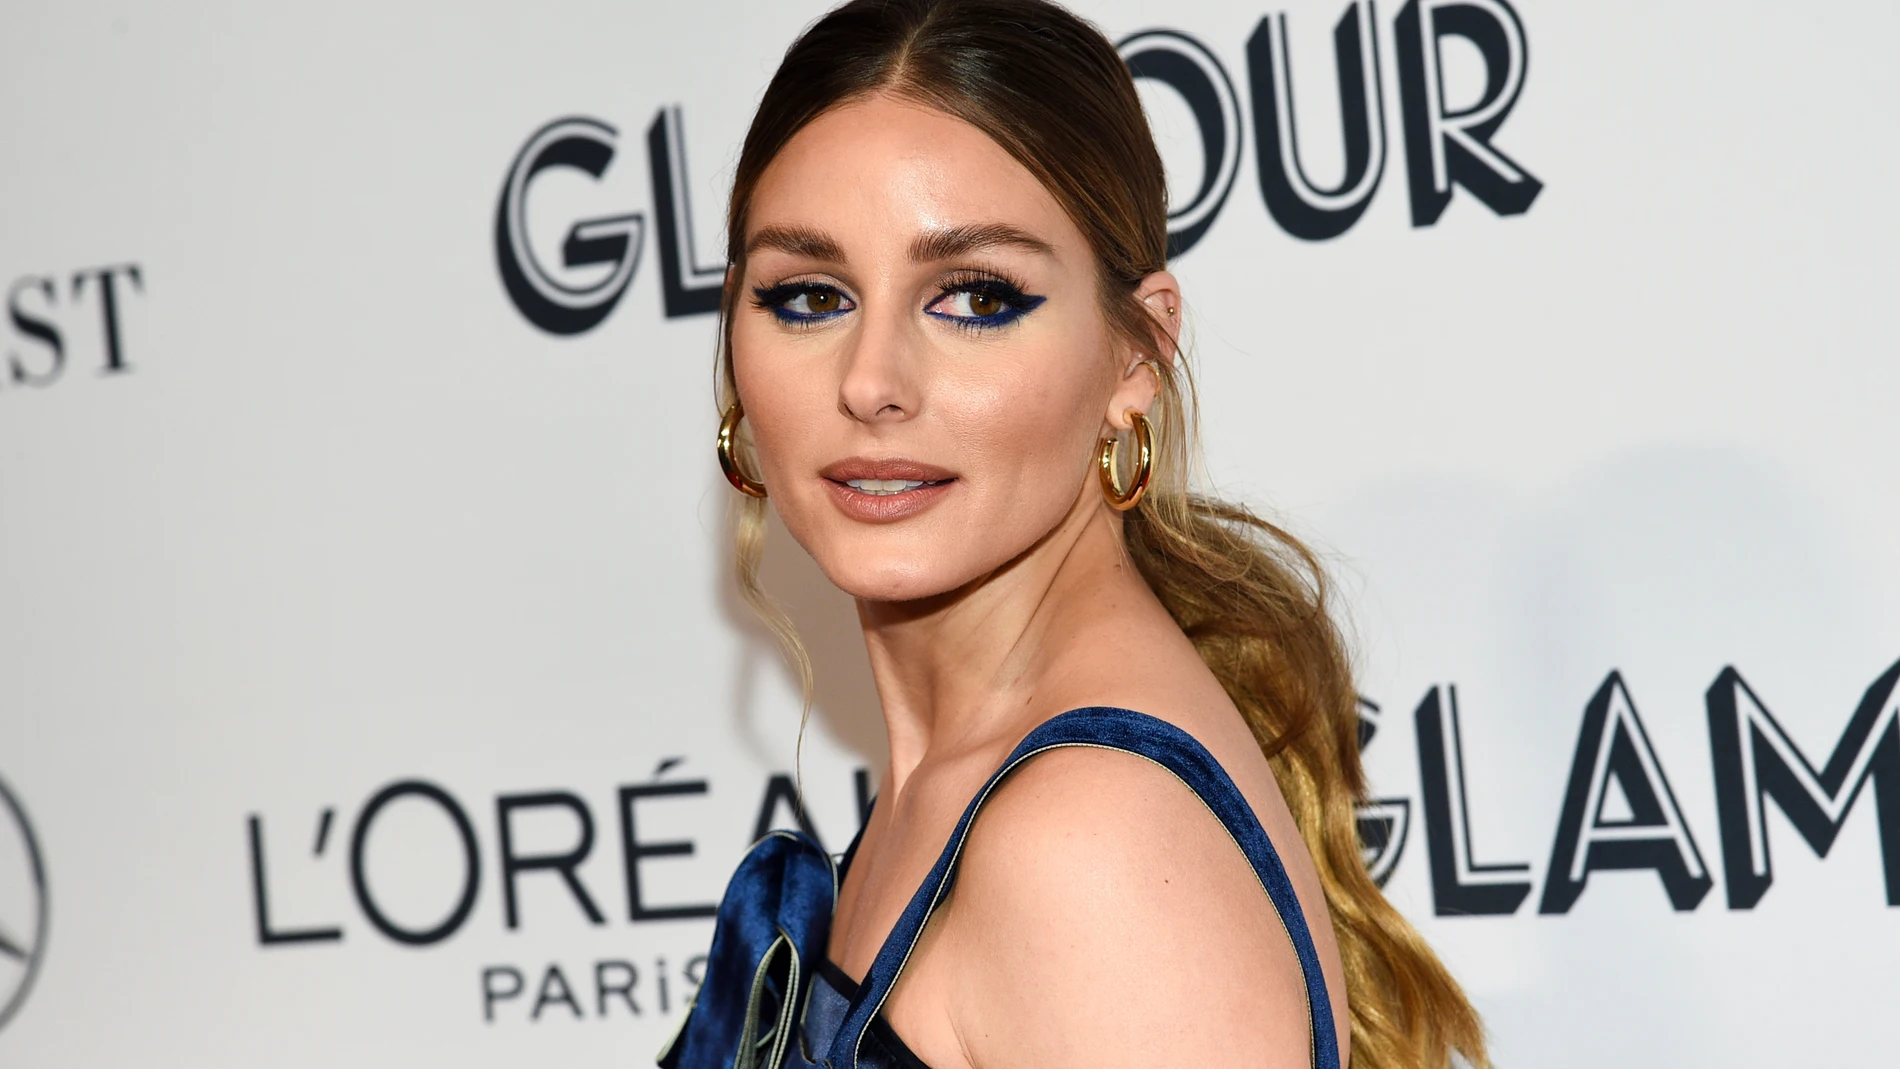 Olivia Palermo at the 2019 Glamour Women Of The Year Awards in New York City, U.S., November 11, 2019.